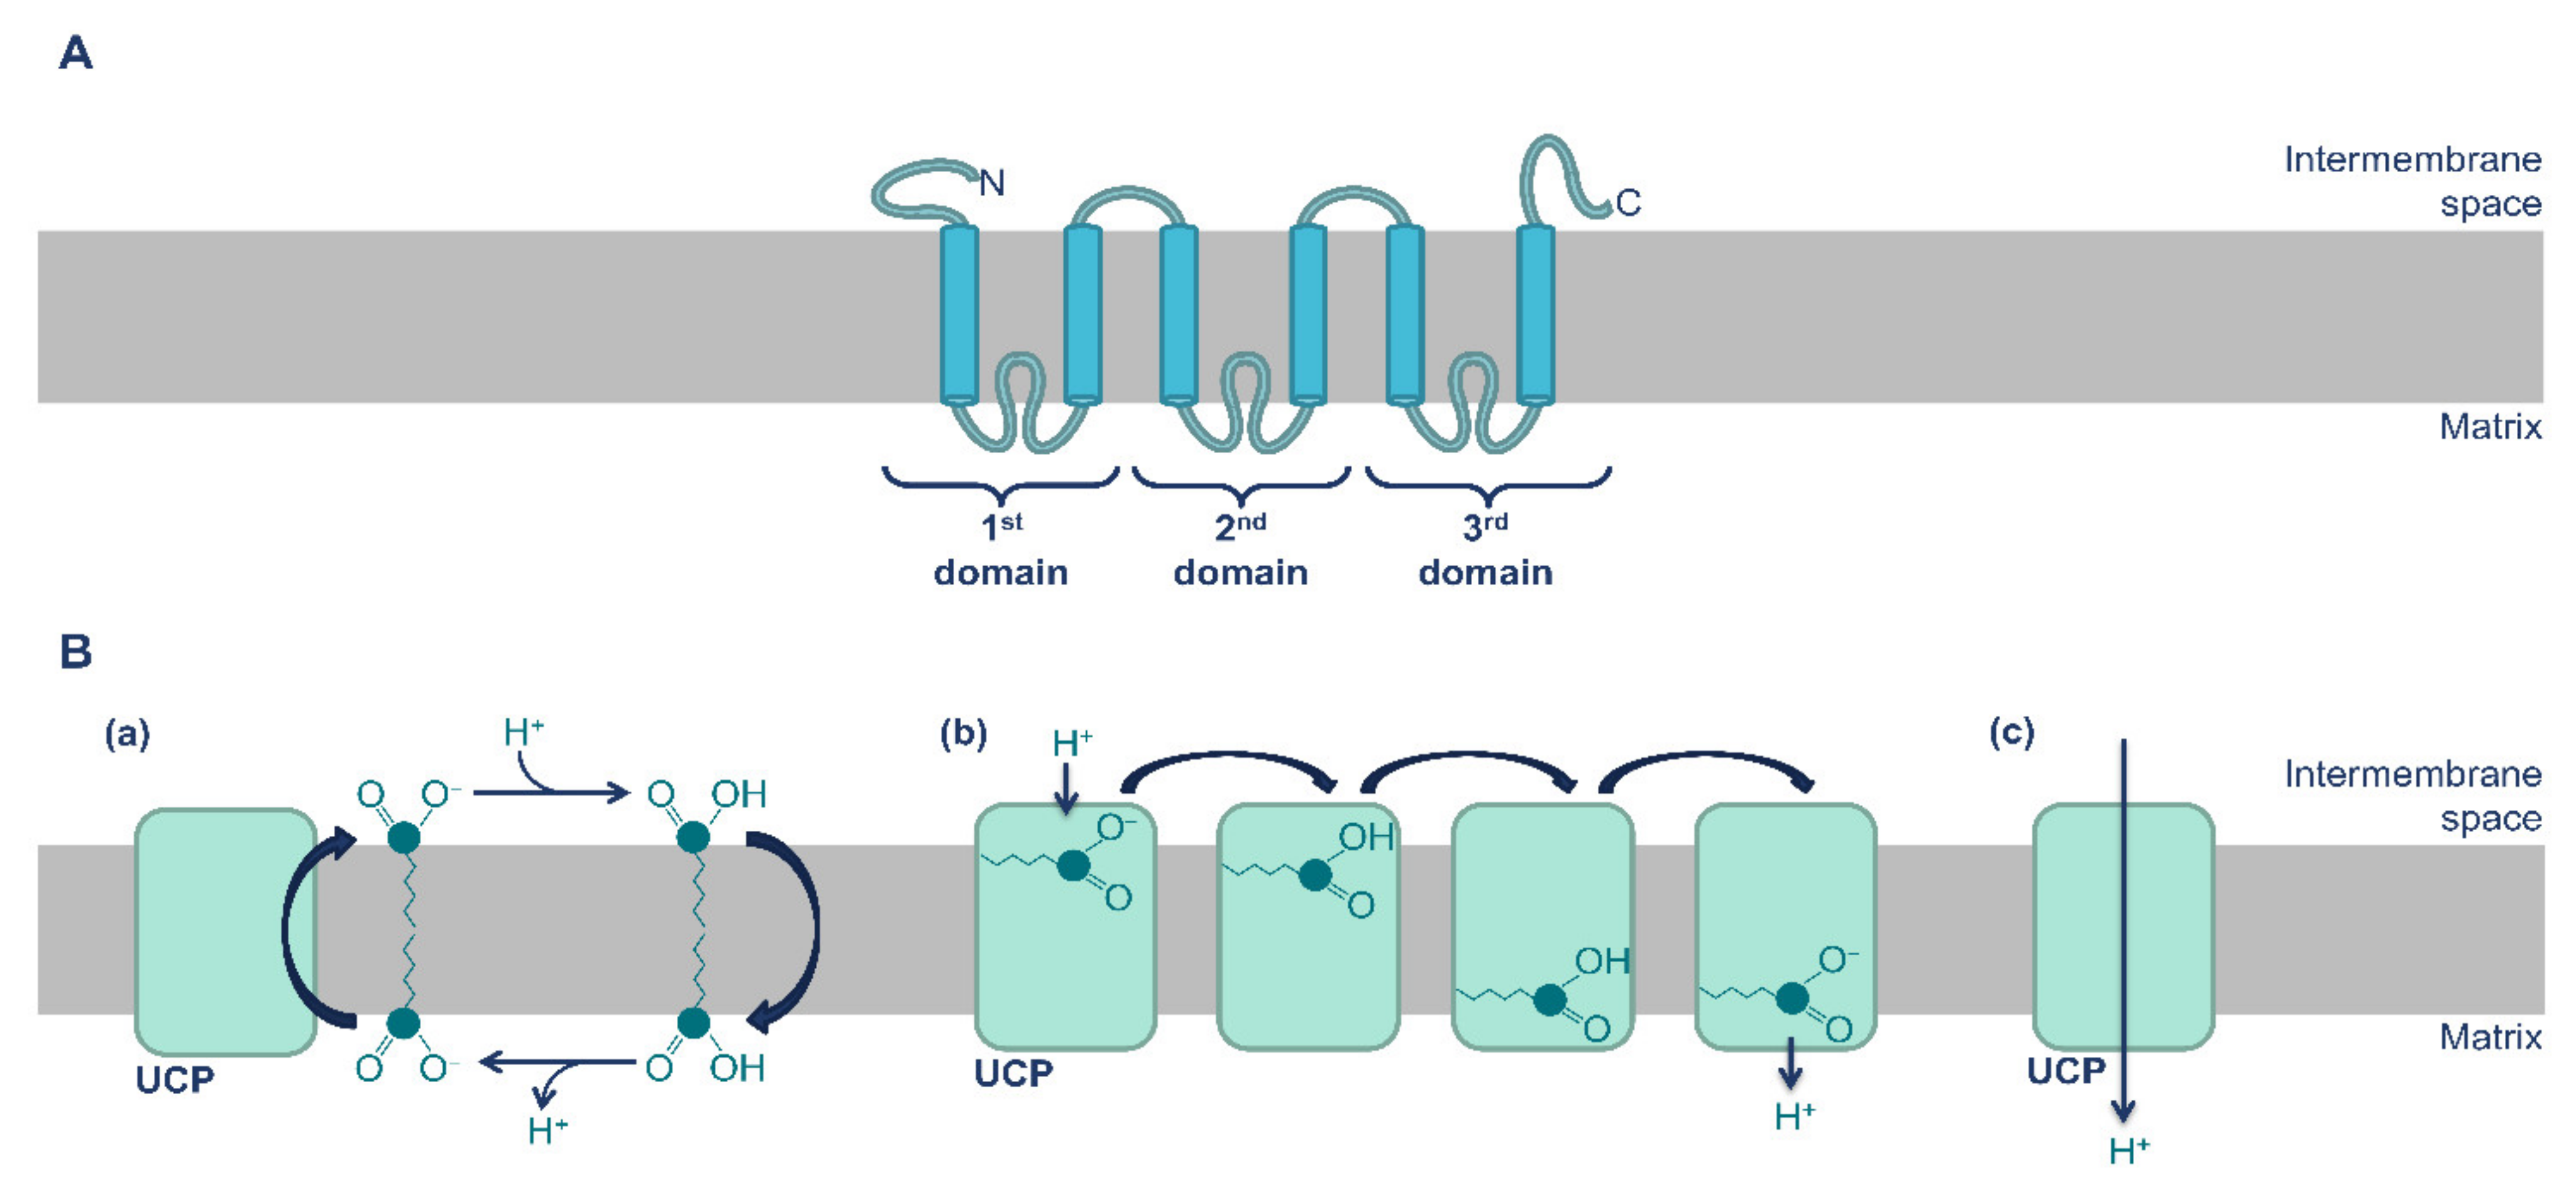 Antioxidants | Free Full-Text | Mitochondrial Uncoupling Proteins 